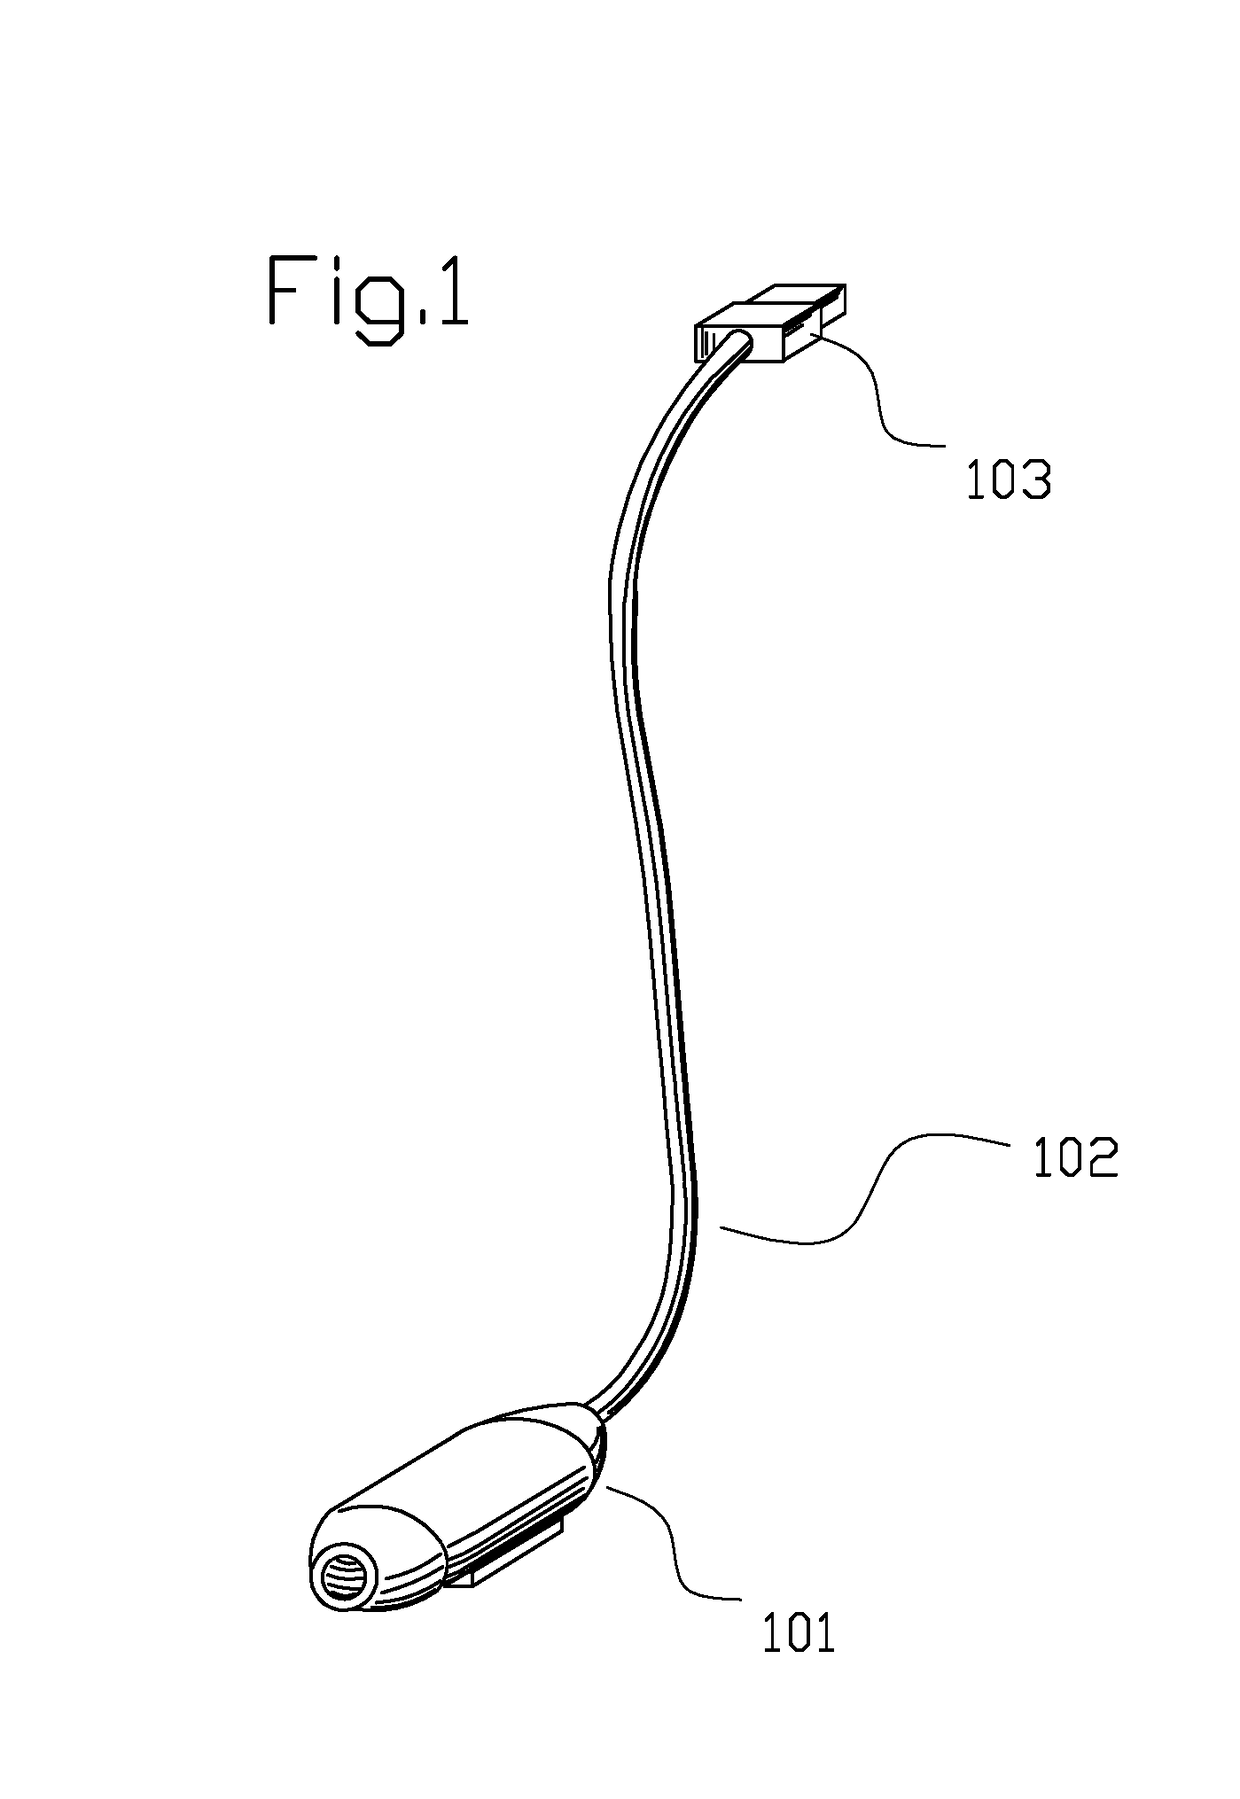 Compact perineal warming device for personal non-invasive portable and stationary use to prevent and alleviate prostate discomfort